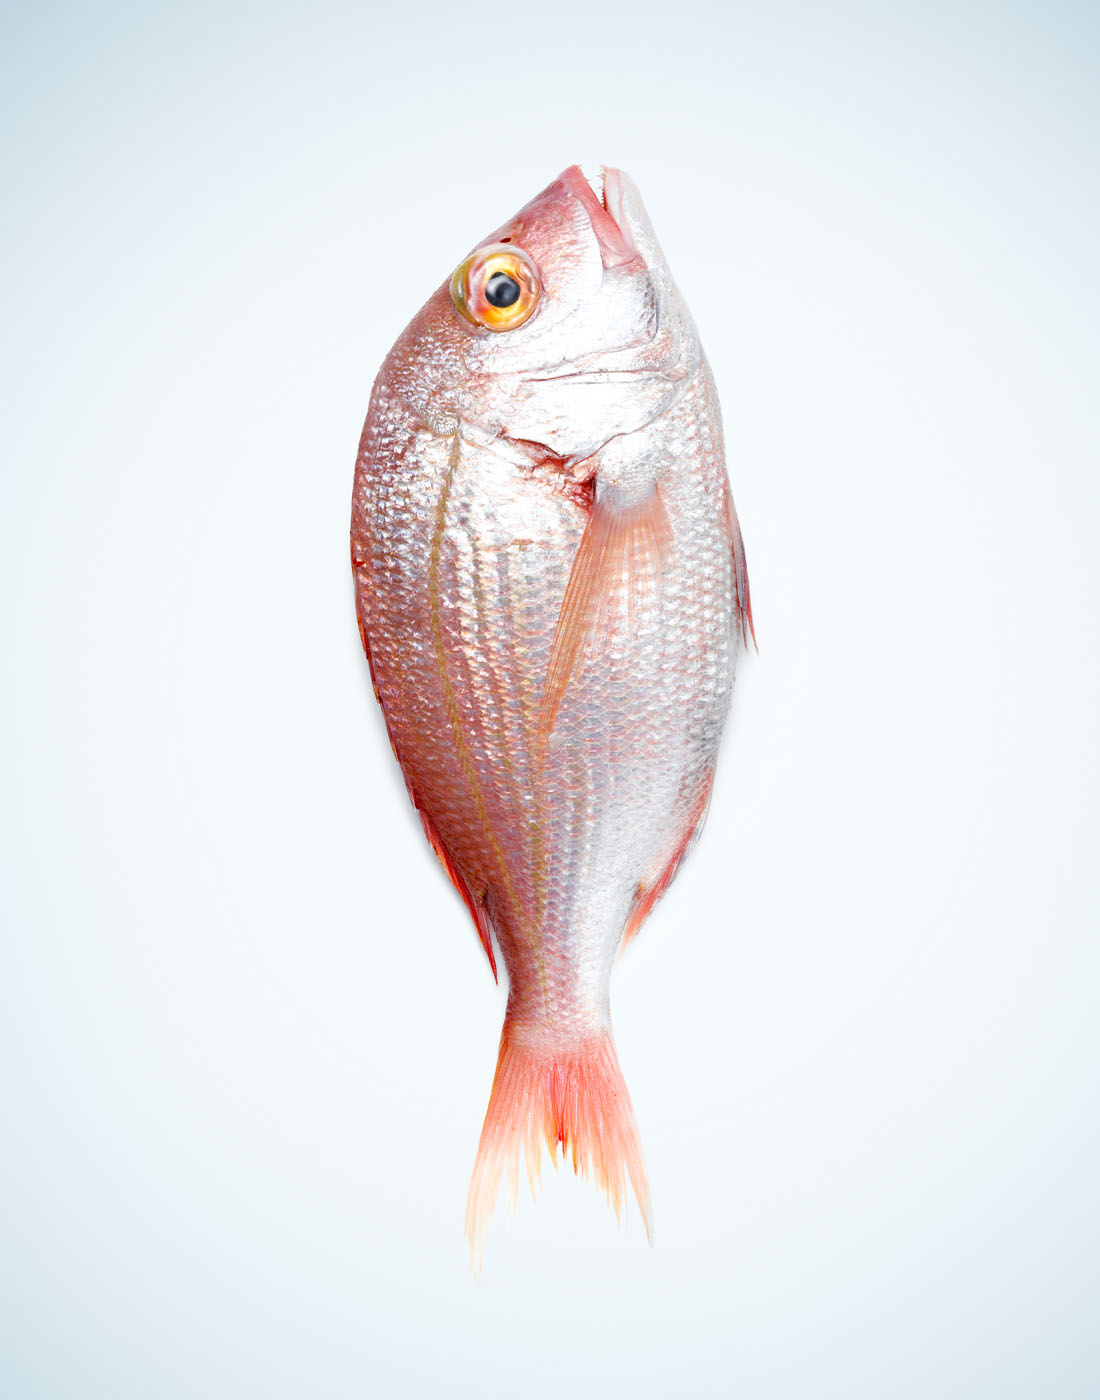 Red snapper fish by Alexander Kent London based still life and product photographer.